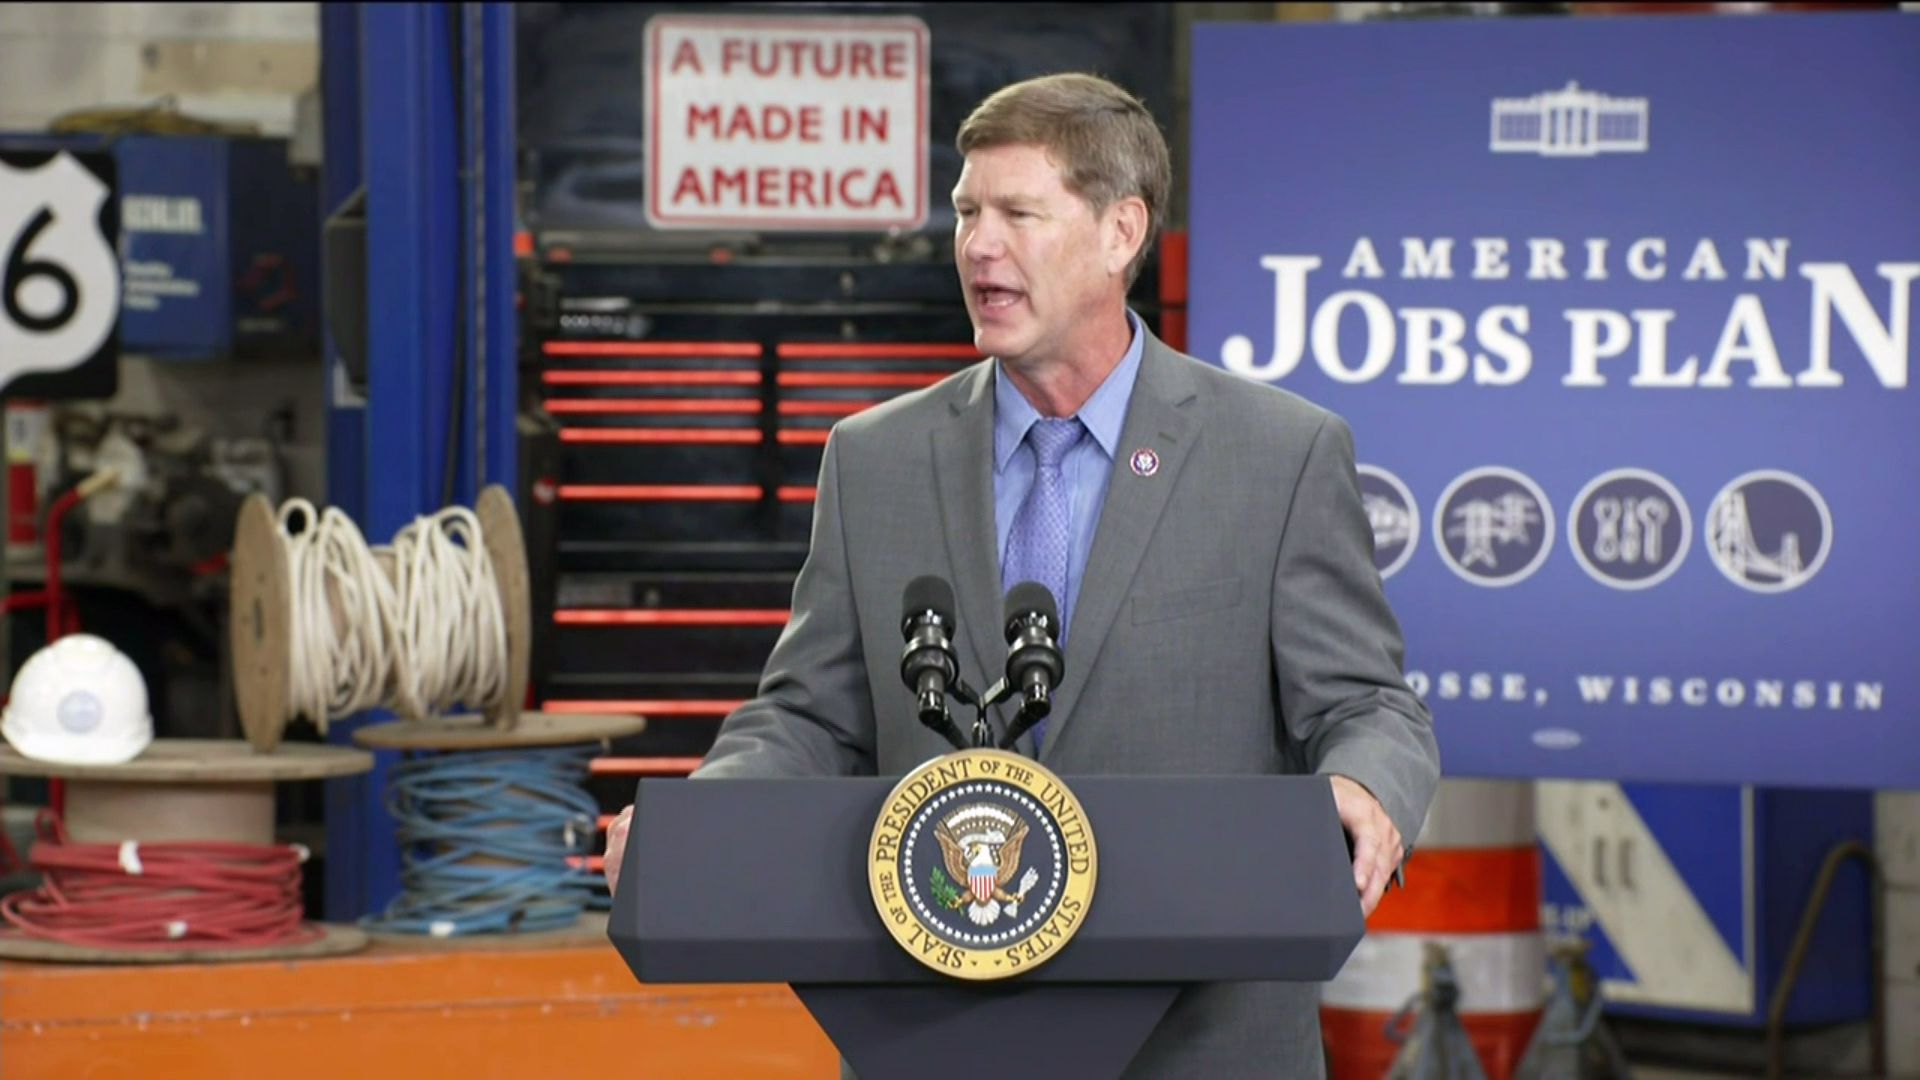 Ron Kind stands behind a podium with two microphones and the seal of the president of the United States inside a workplace with a tool cabinet, spools of electrical wire and other equipment, with signs in the background reading "American Jobs Plan" and "A Future Made in America."